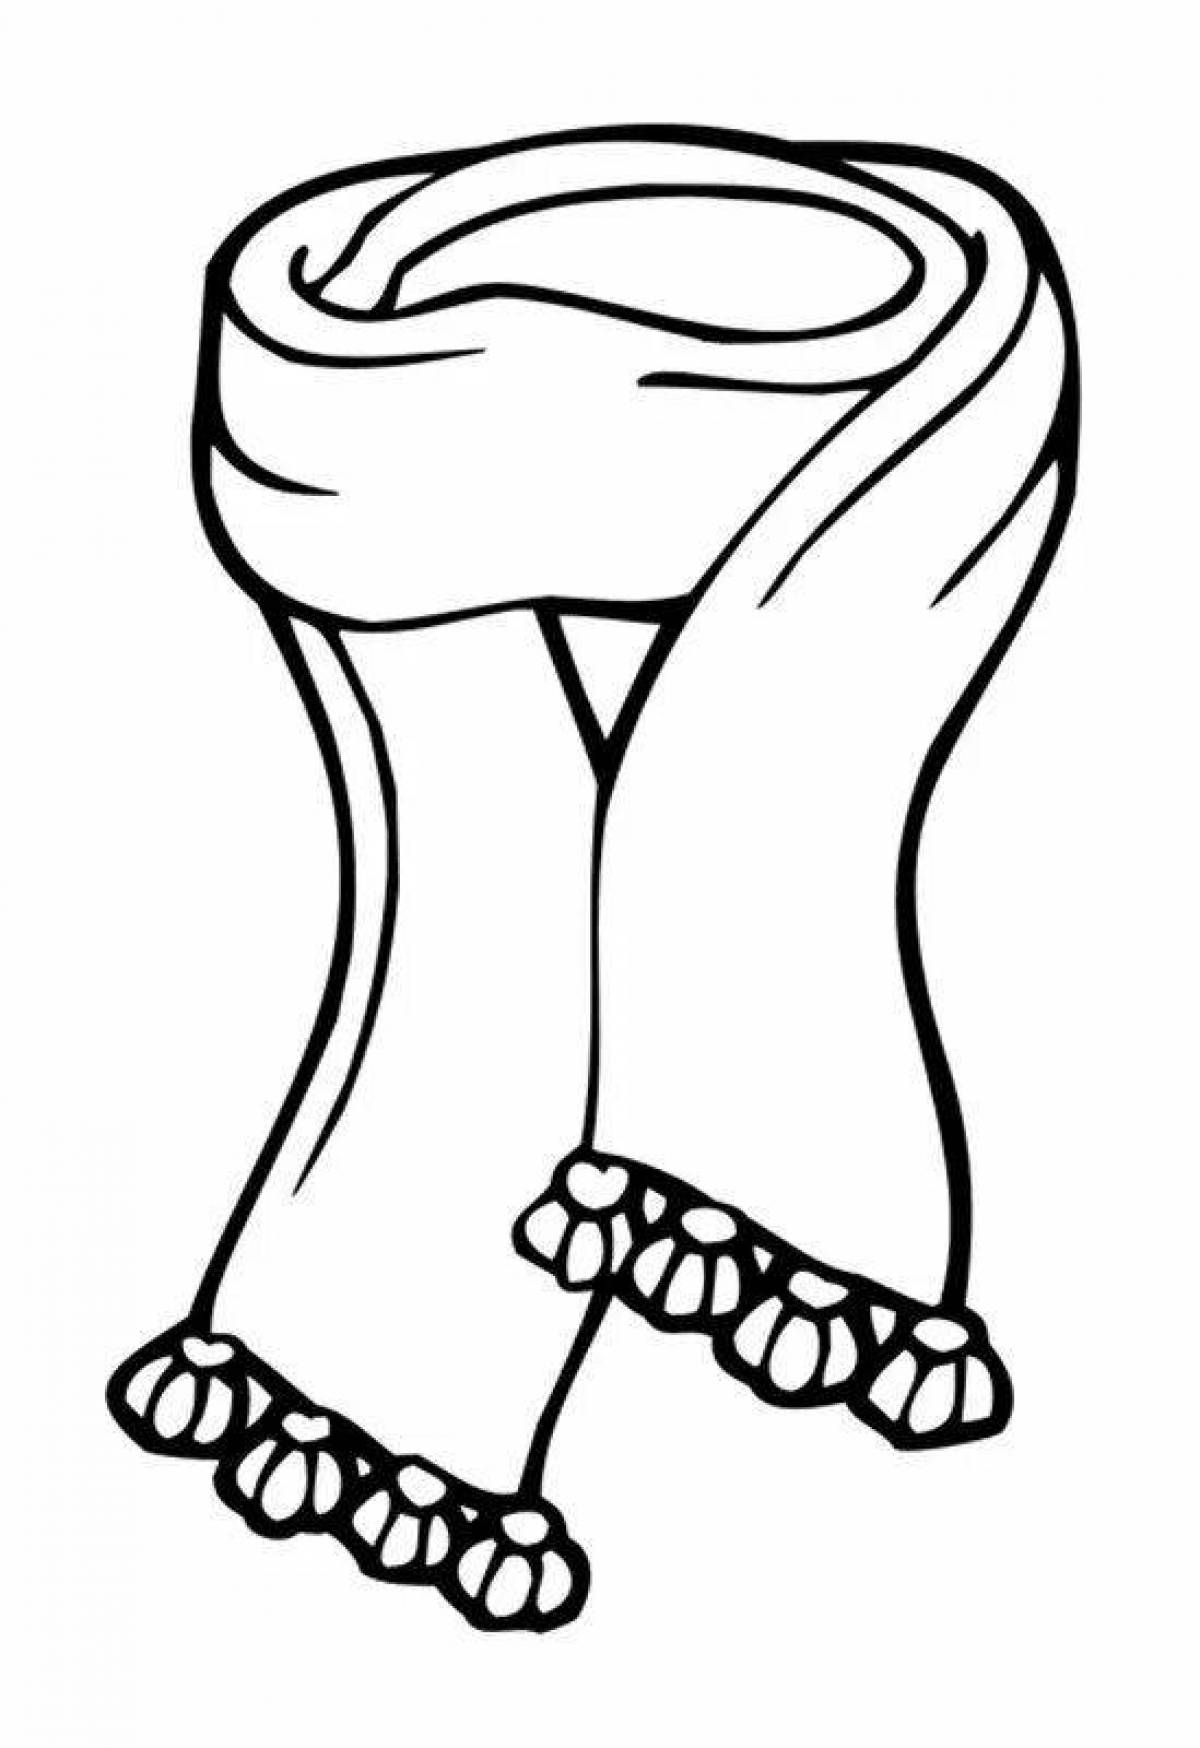 Stupid scarf coloring page for 2-3 year olds